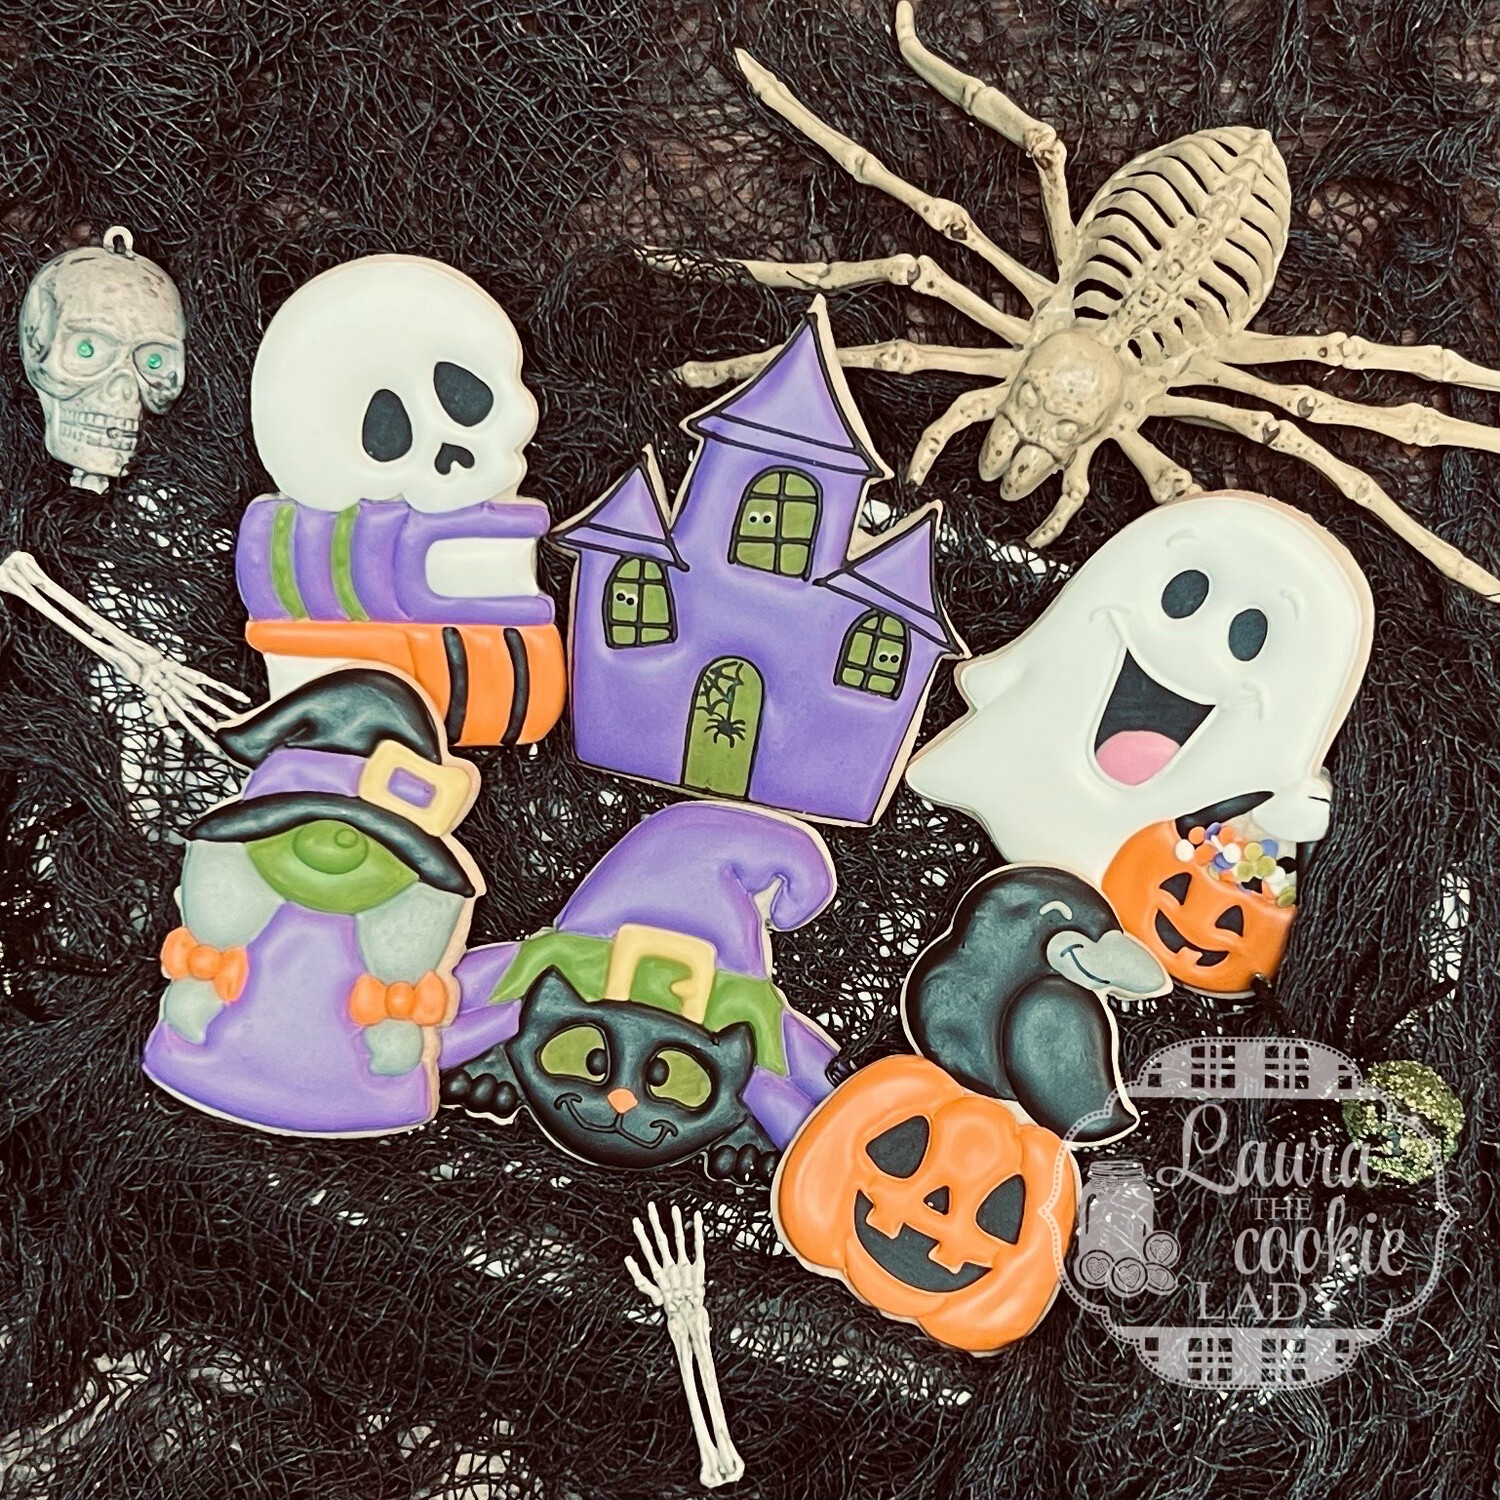 Halloween Cookie Decorating Class Friday 10/28 6pm